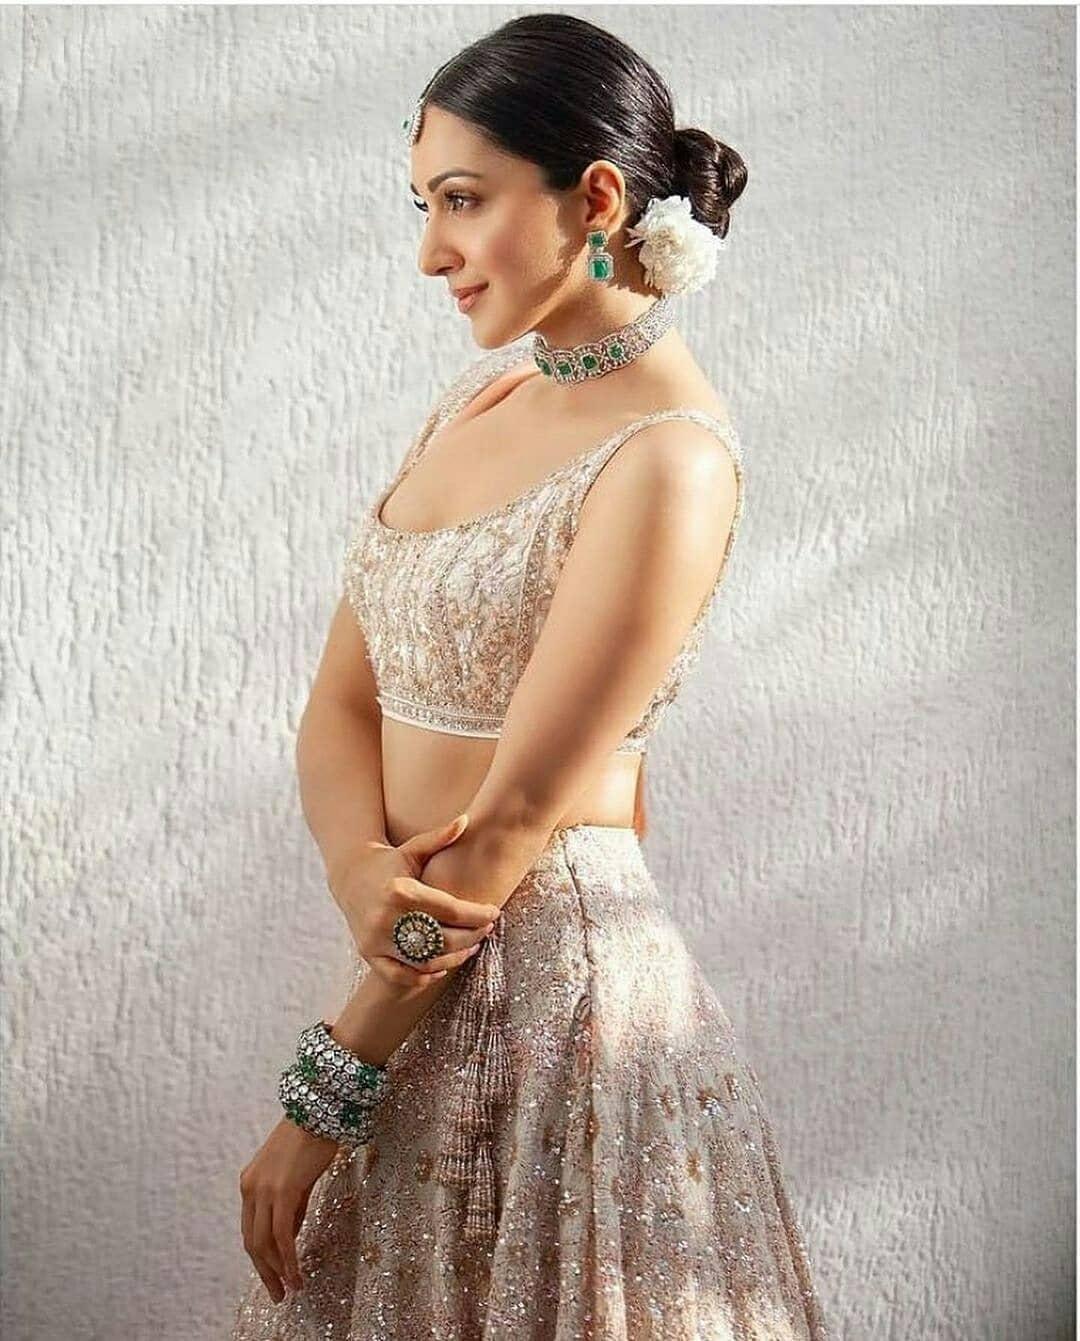 Sidharth Malhotra - Kiara Advani Wedding: Pictures of the Actress in Lehenga  Cholis That Prove She'll Be the Prettiest Bride! | 👗 LatestLY